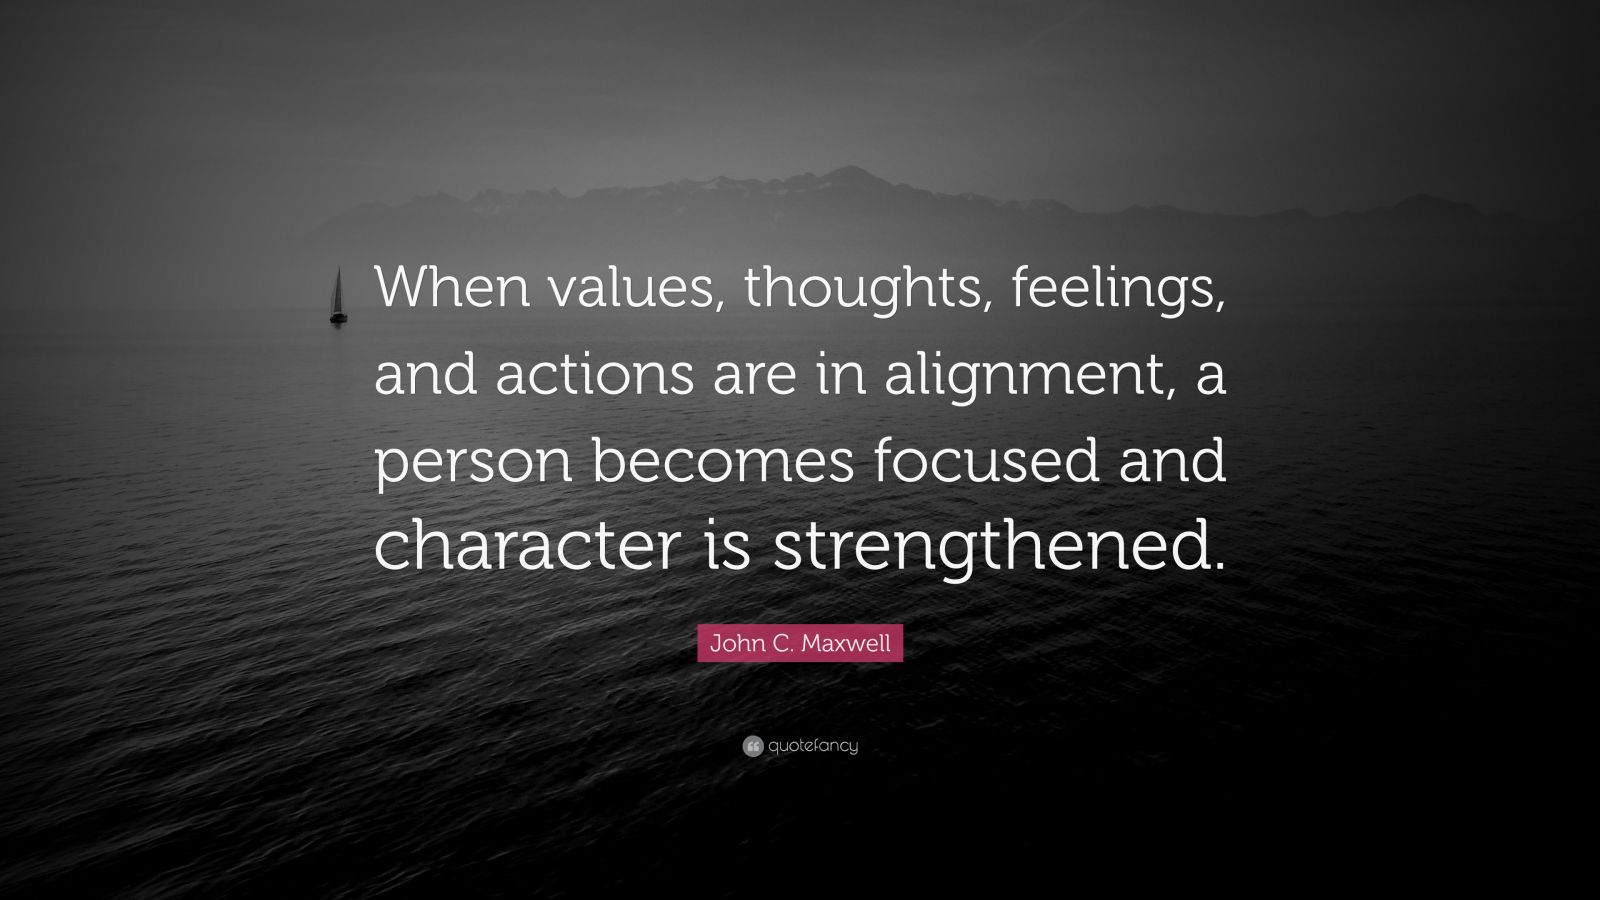 John C. Maxwell Quote: “When values, thoughts, feelings, and actions